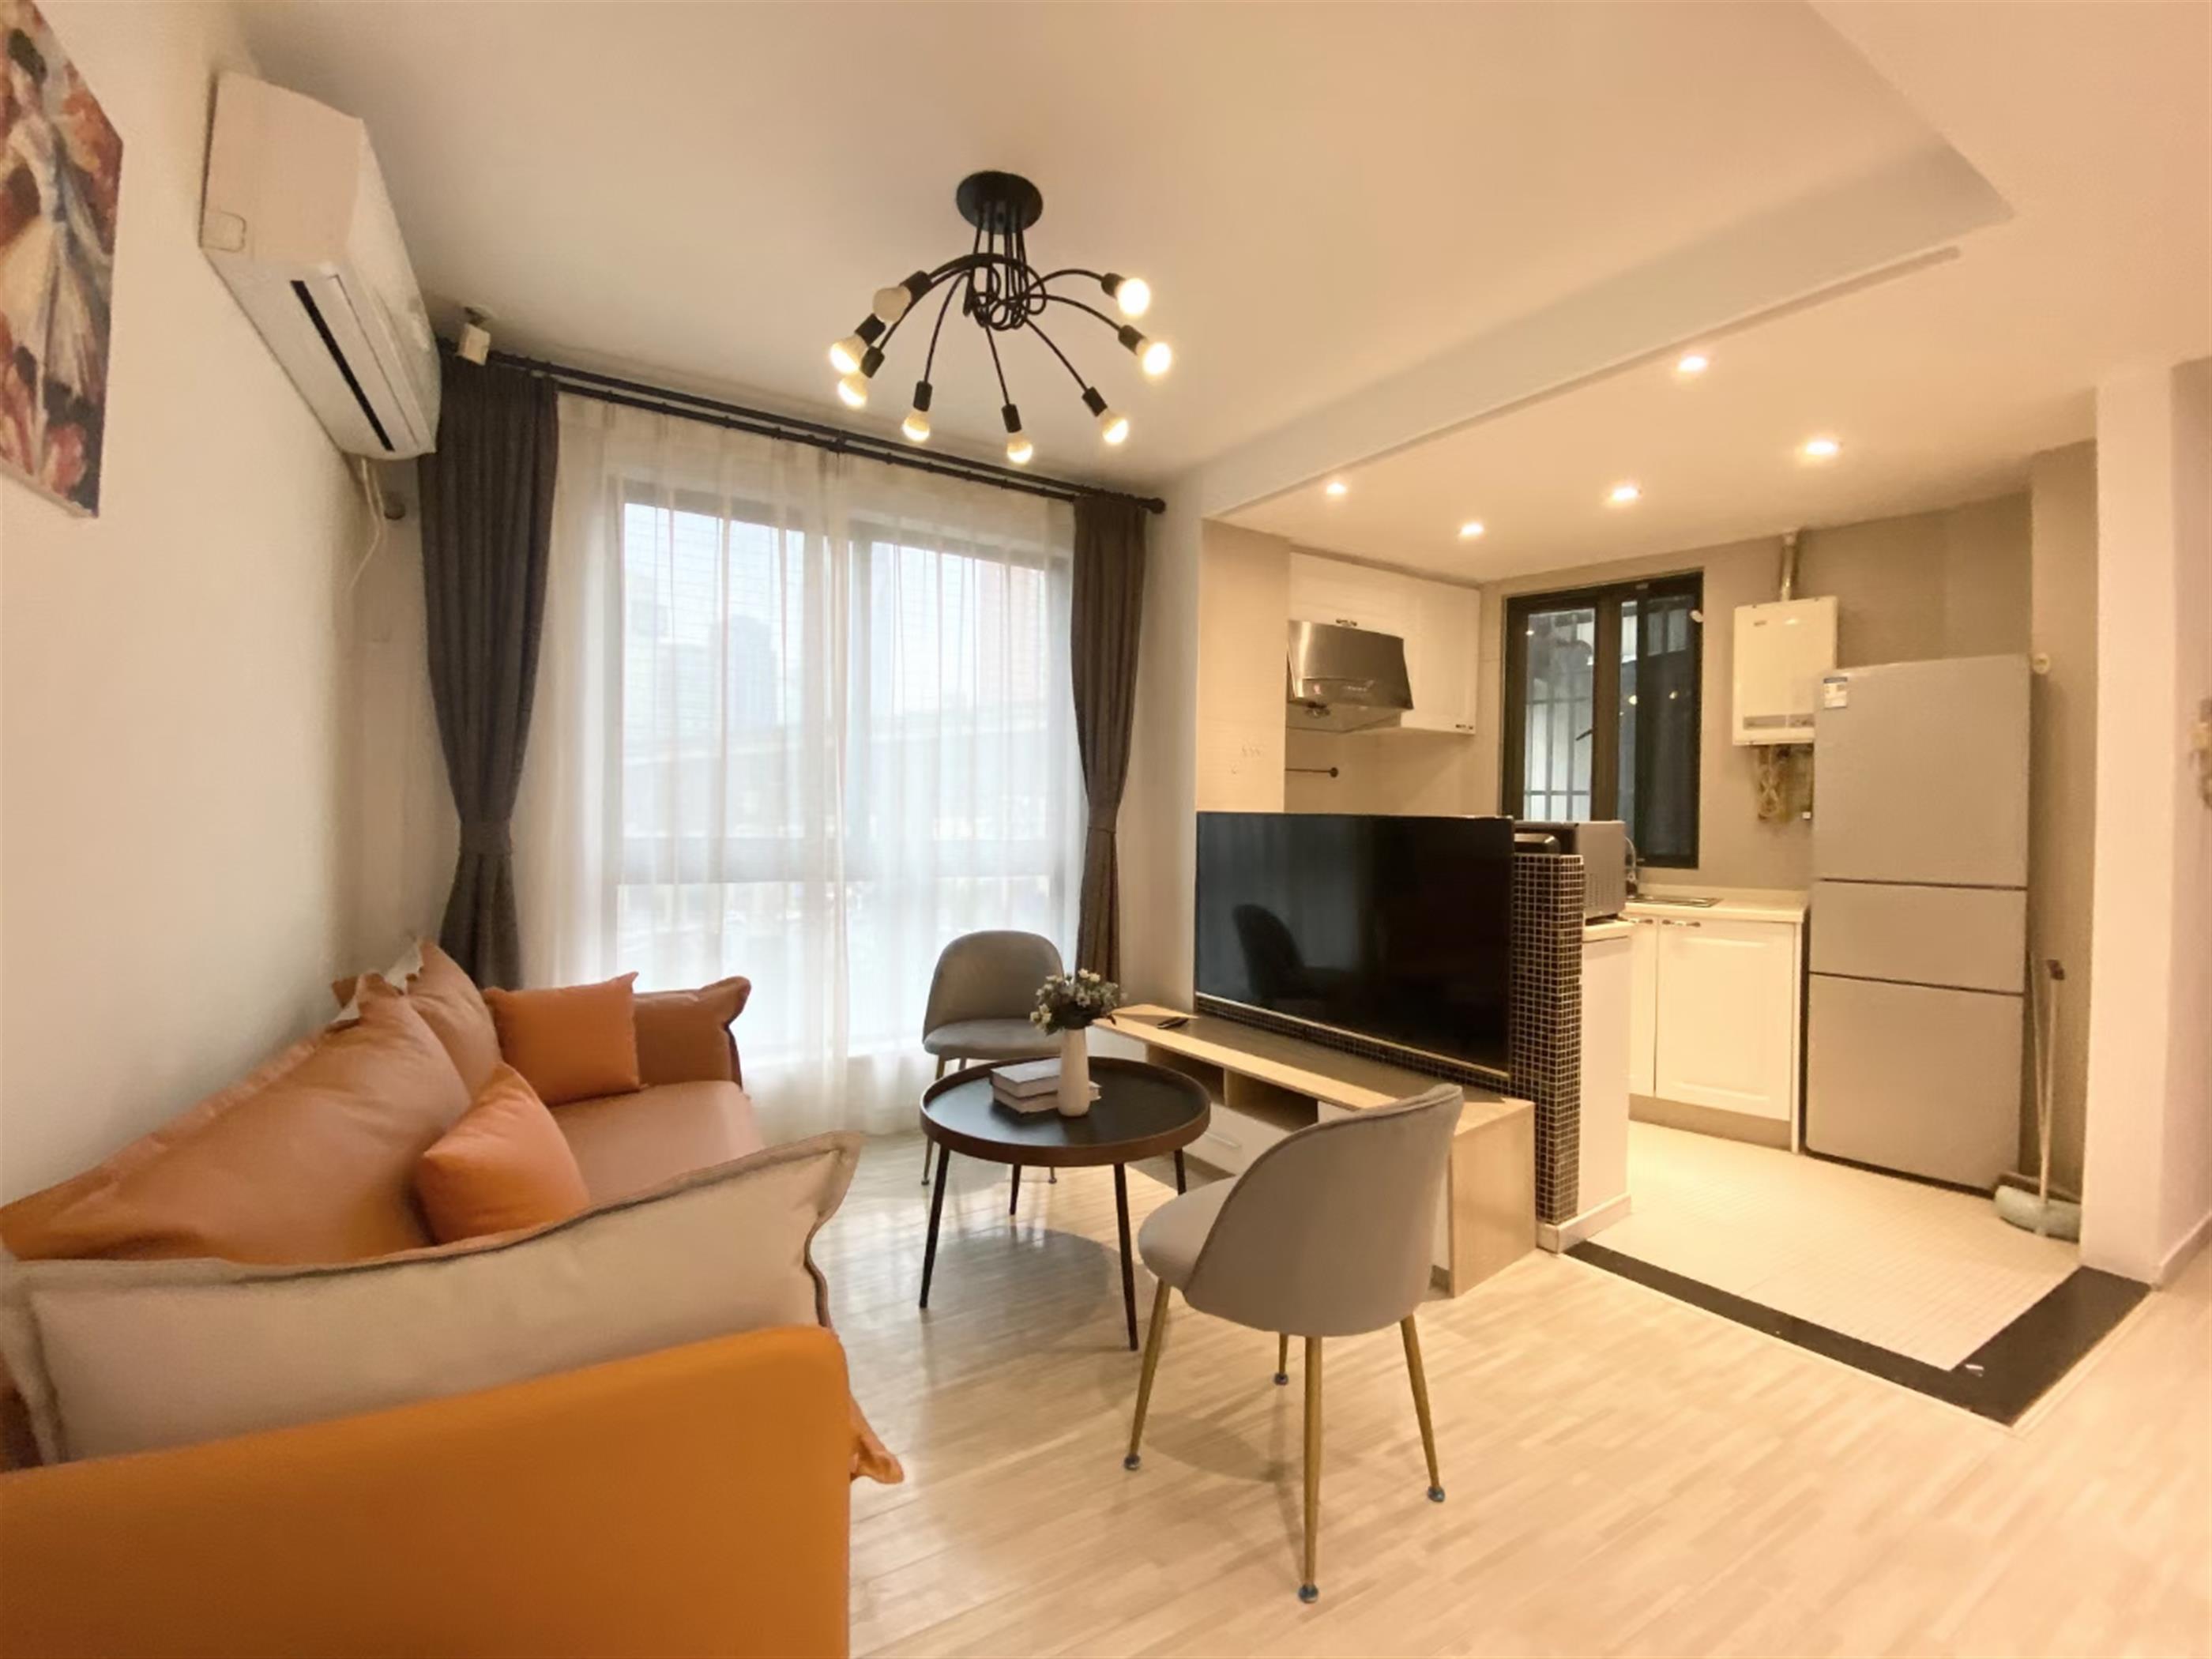 large living room Spacious Newly Renovated 2BR Top of City Apt Nr Ln 2/12/13 for Rent in Shanghai